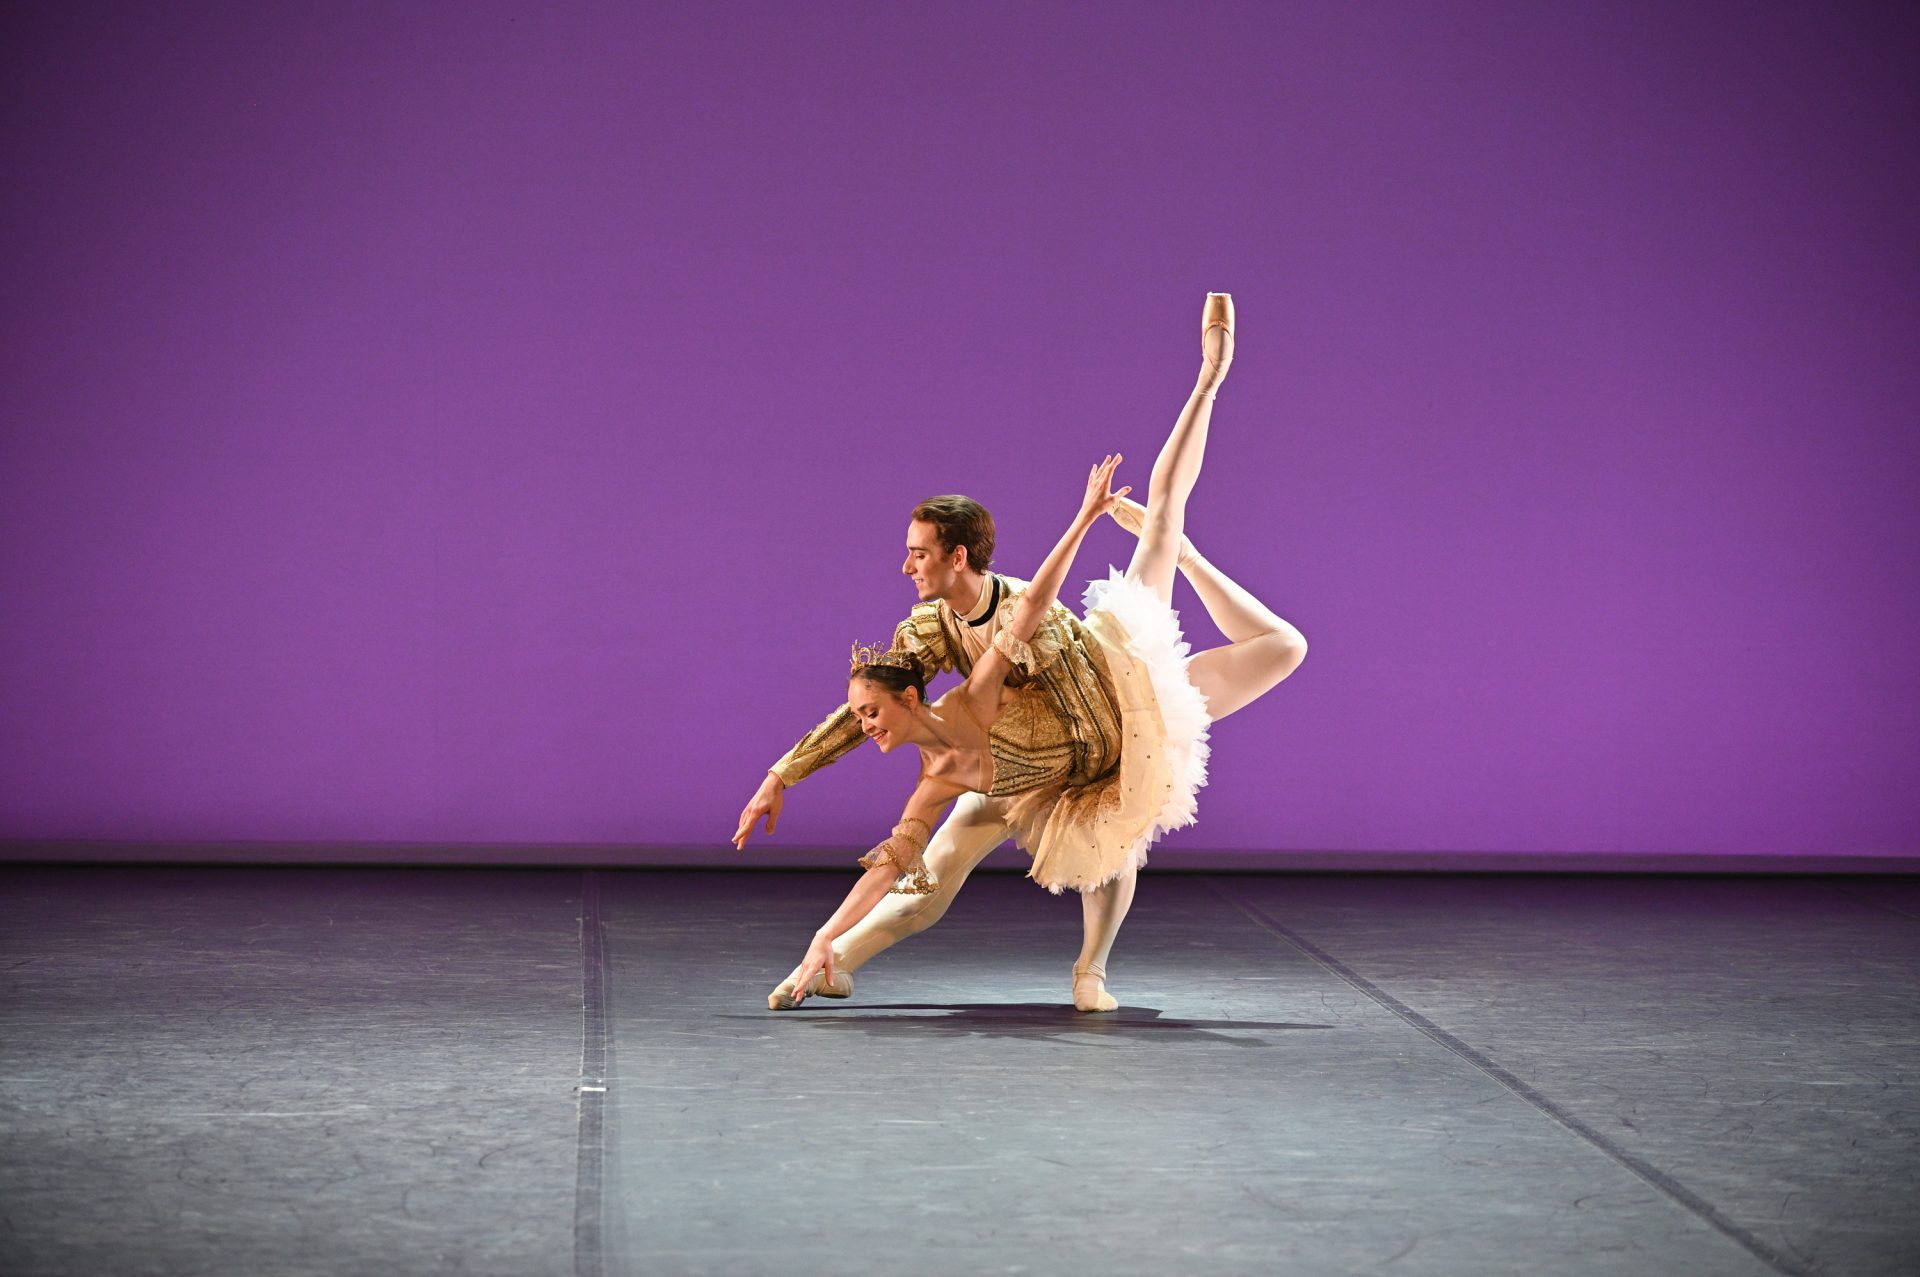 A dancer in the role of Prince Désiré from The Sleeping Beauty is holding a dancer in the role of Aurora who is leaning forward with her legs up in the air in a beautiful ballet pose. The Prince is wearing a golden top and white tights while Aurora is wearing a golden and white tutu. They are on a stage with a violet background.